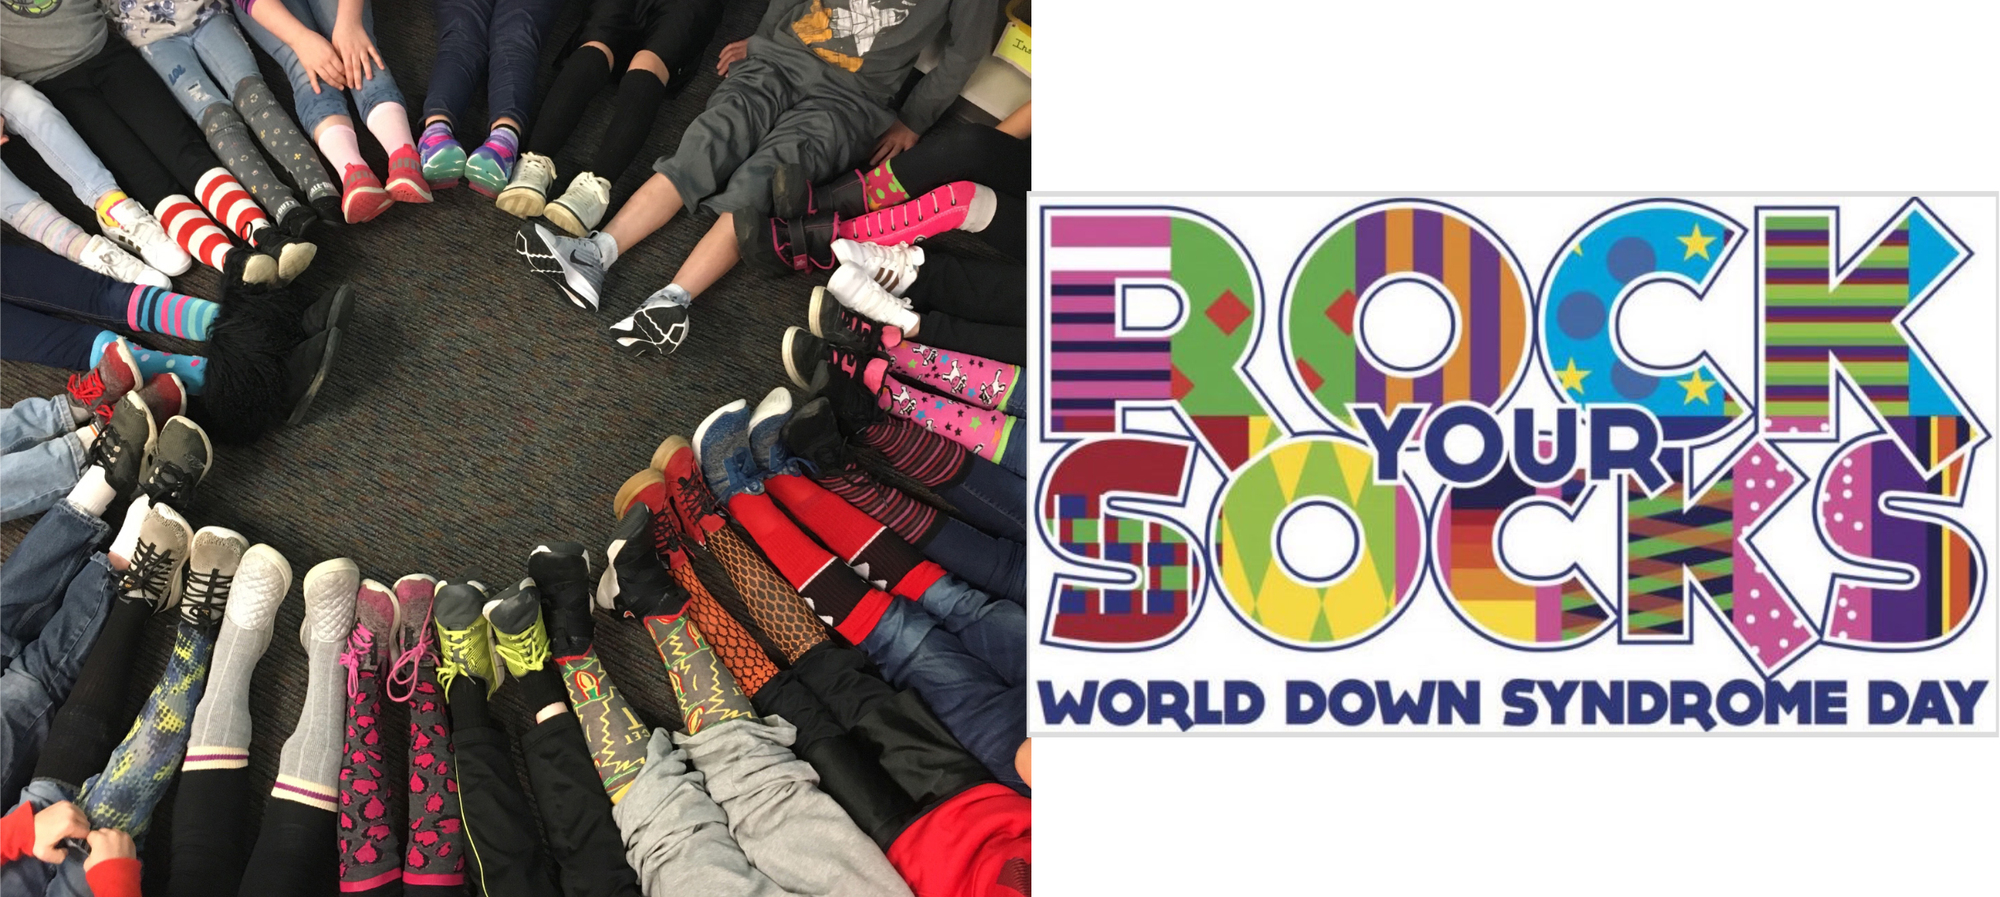 Students at Patterson Elementary were "Rocking their Socks for World Down Syndrome Day".  Students were sitting in a circle showing their socks.